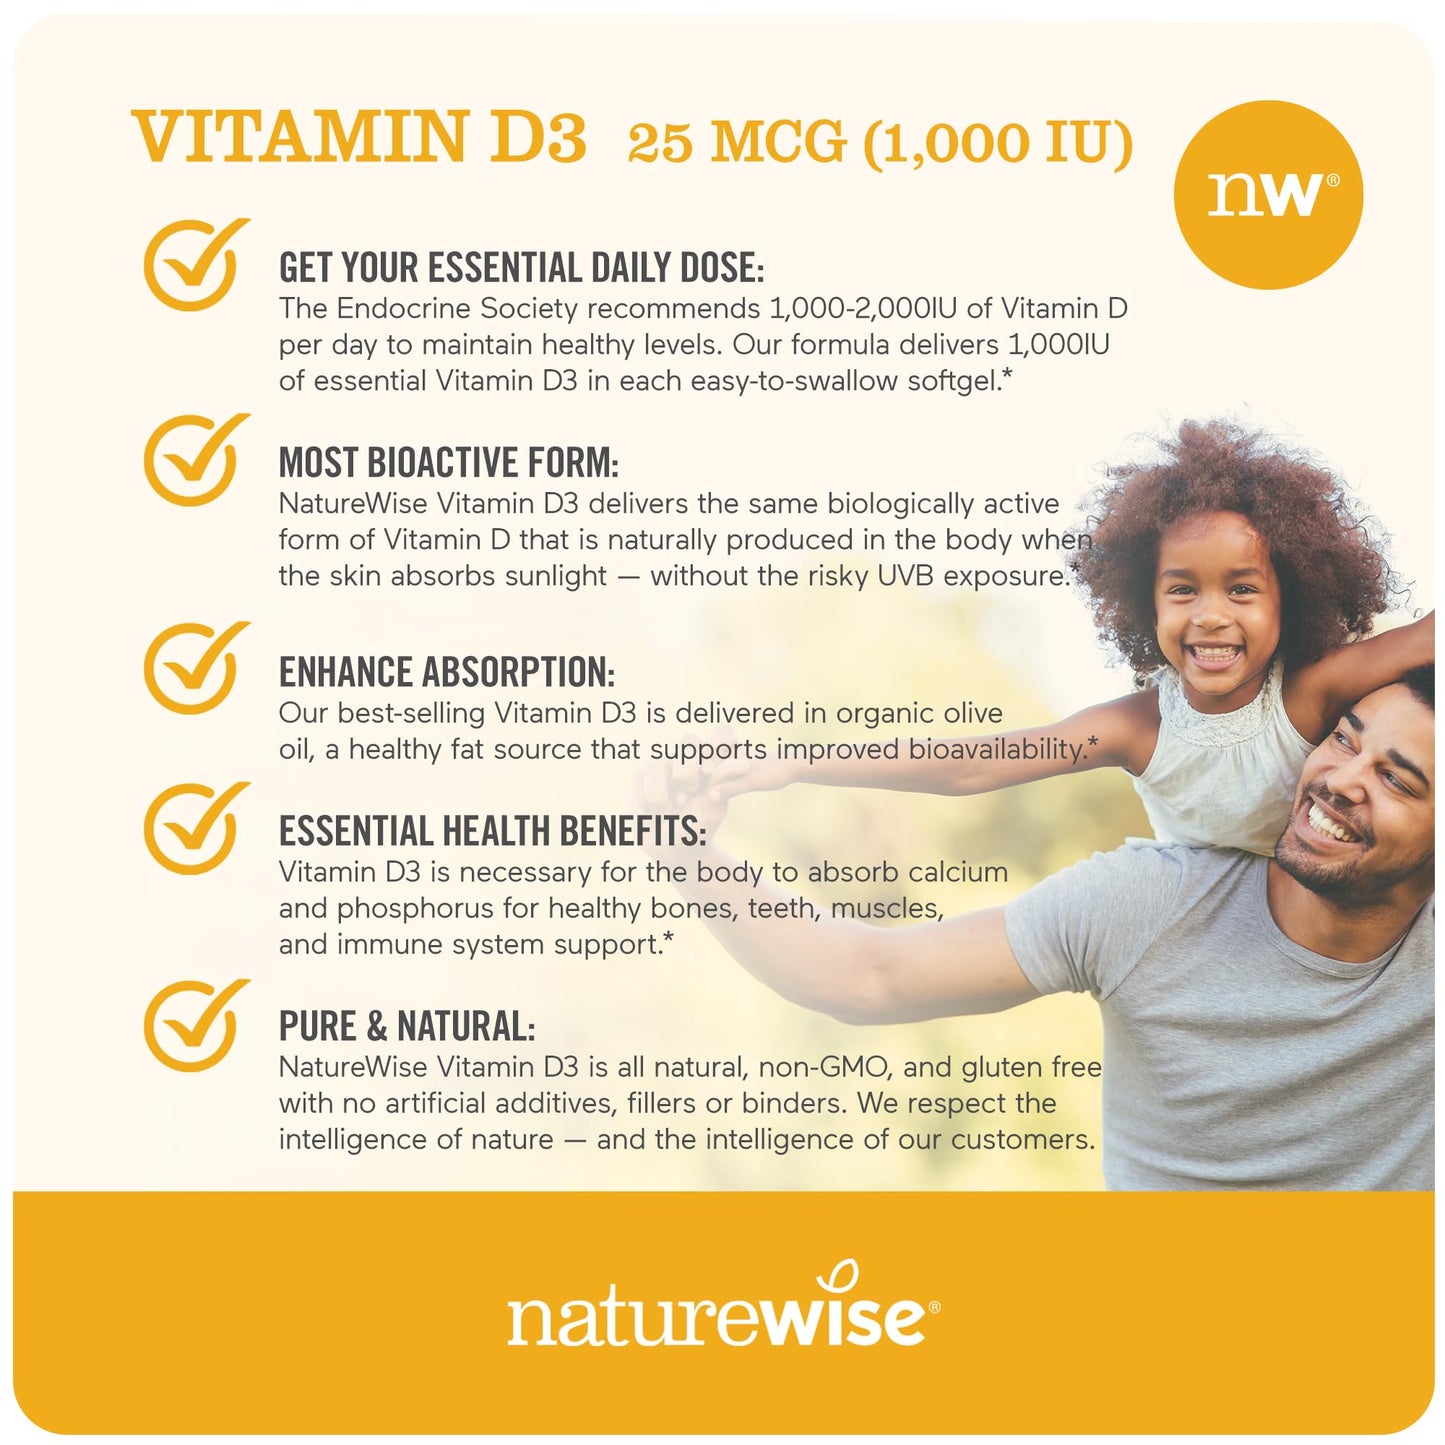 NatureWise Vitamin D3 1000iu (25 mcg) Healthy Muscle Function, and Immune Support, Non-GMO, Gluten Free in Cold-Pressed Olive Oil, Packaging Vary ( Mini Softgel), 360 Count